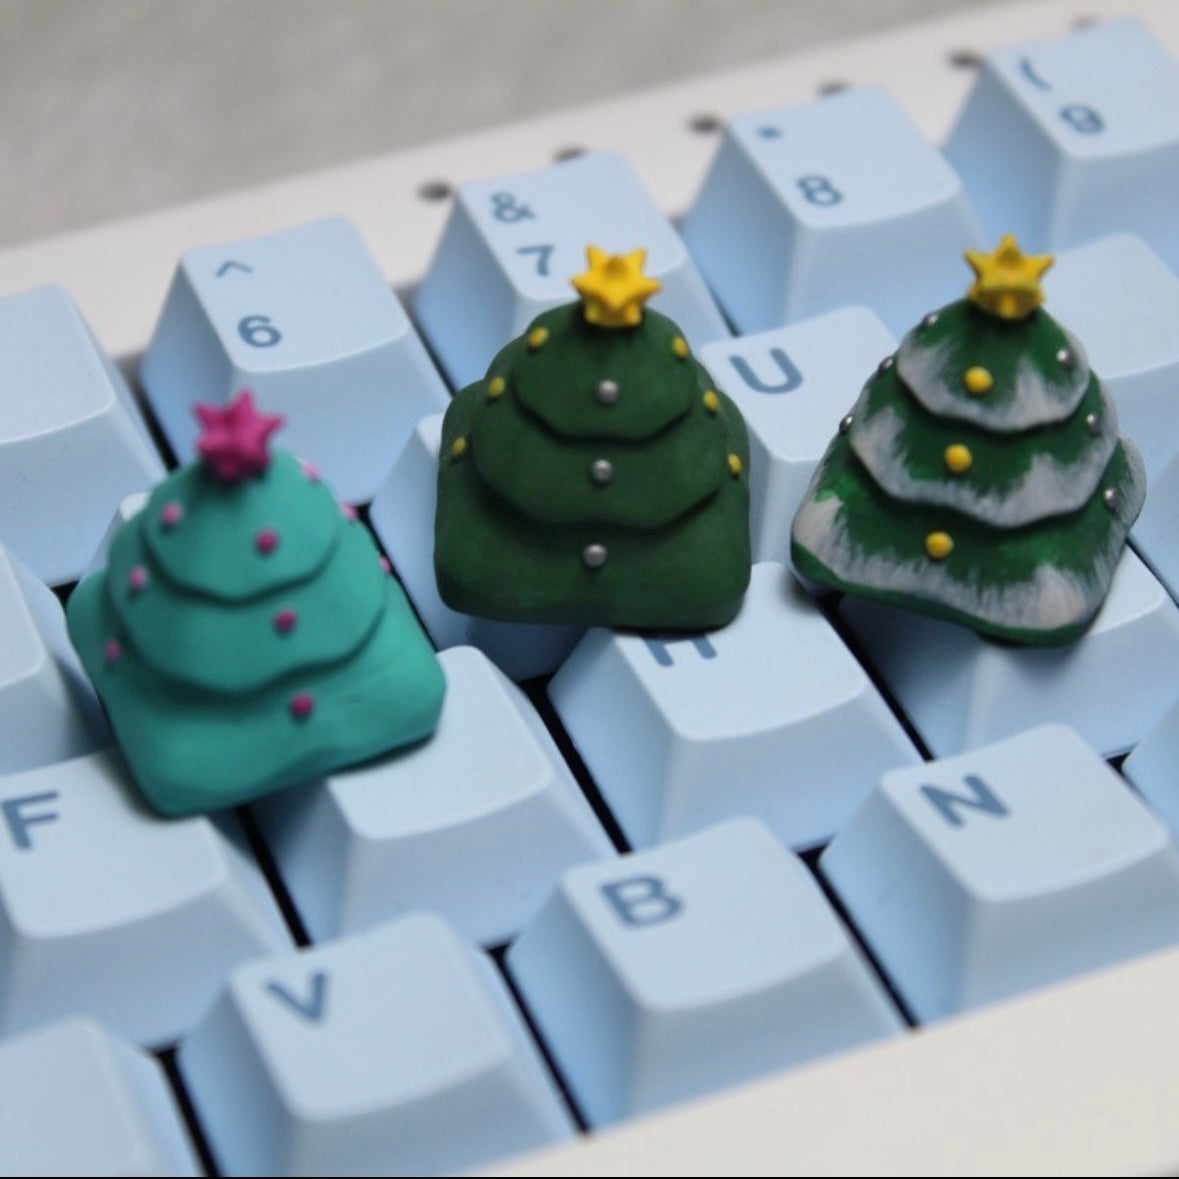 mini's Christmas tree gift, incredibly placed on the keyboard